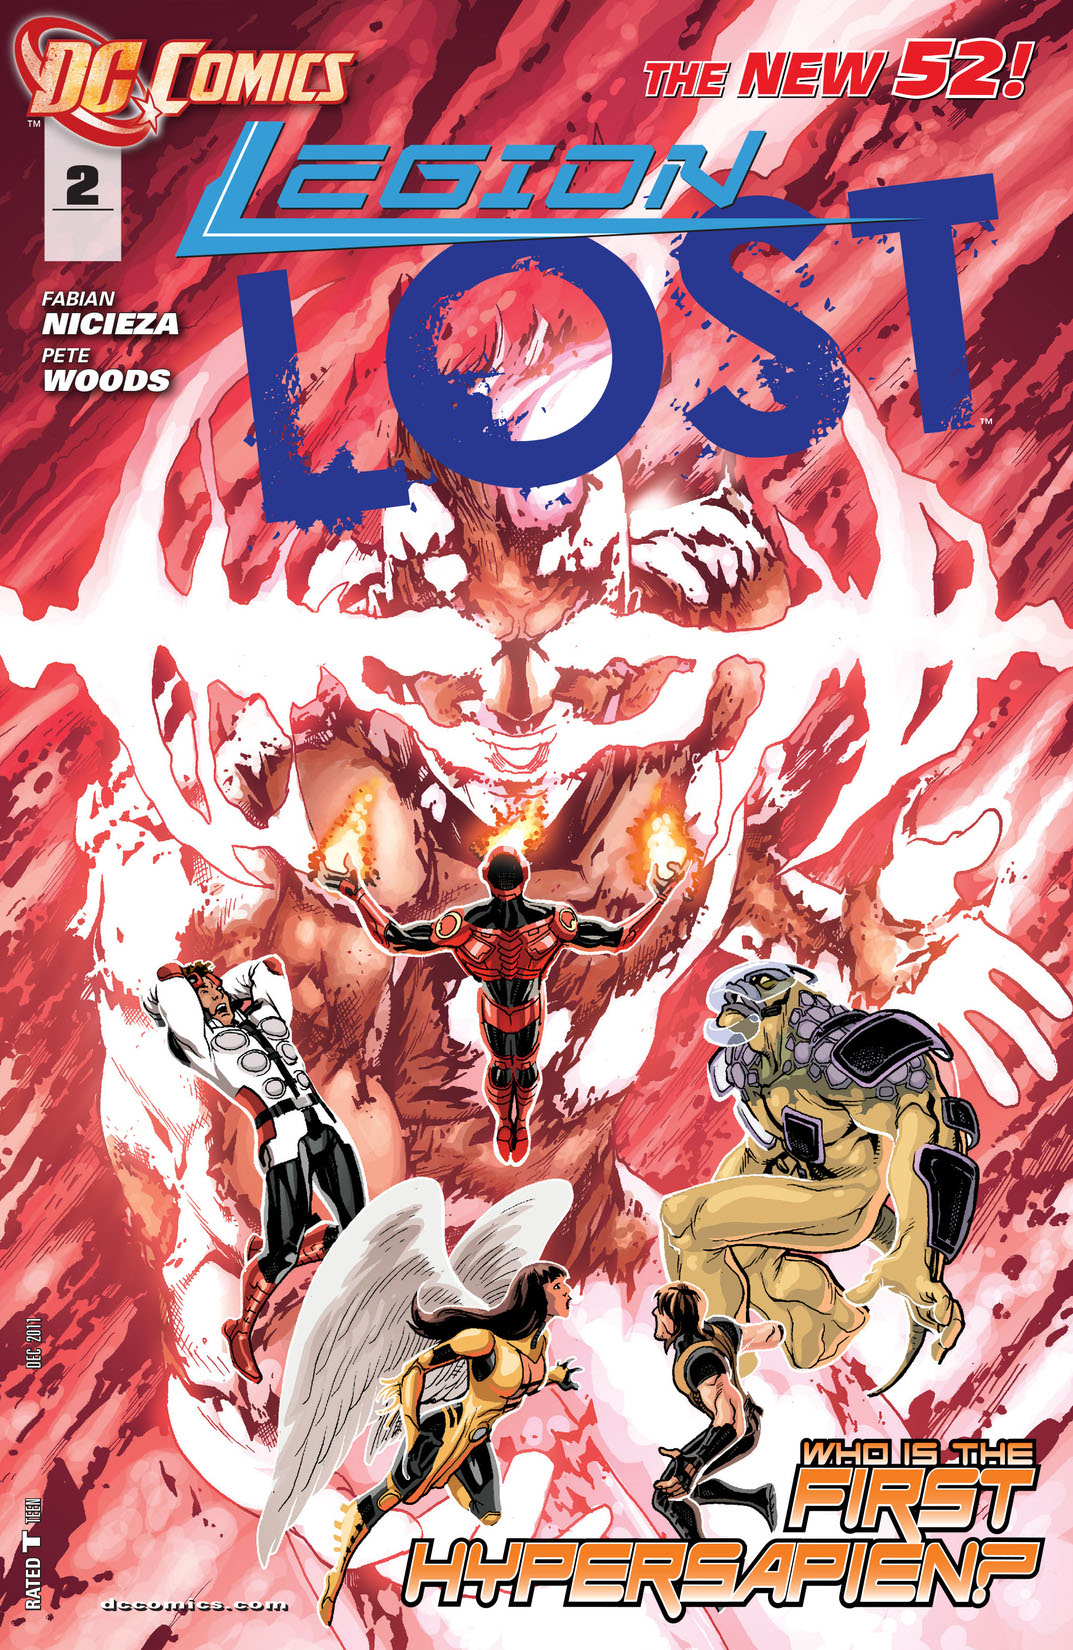 Legion Lost (2011-) #2 preview images